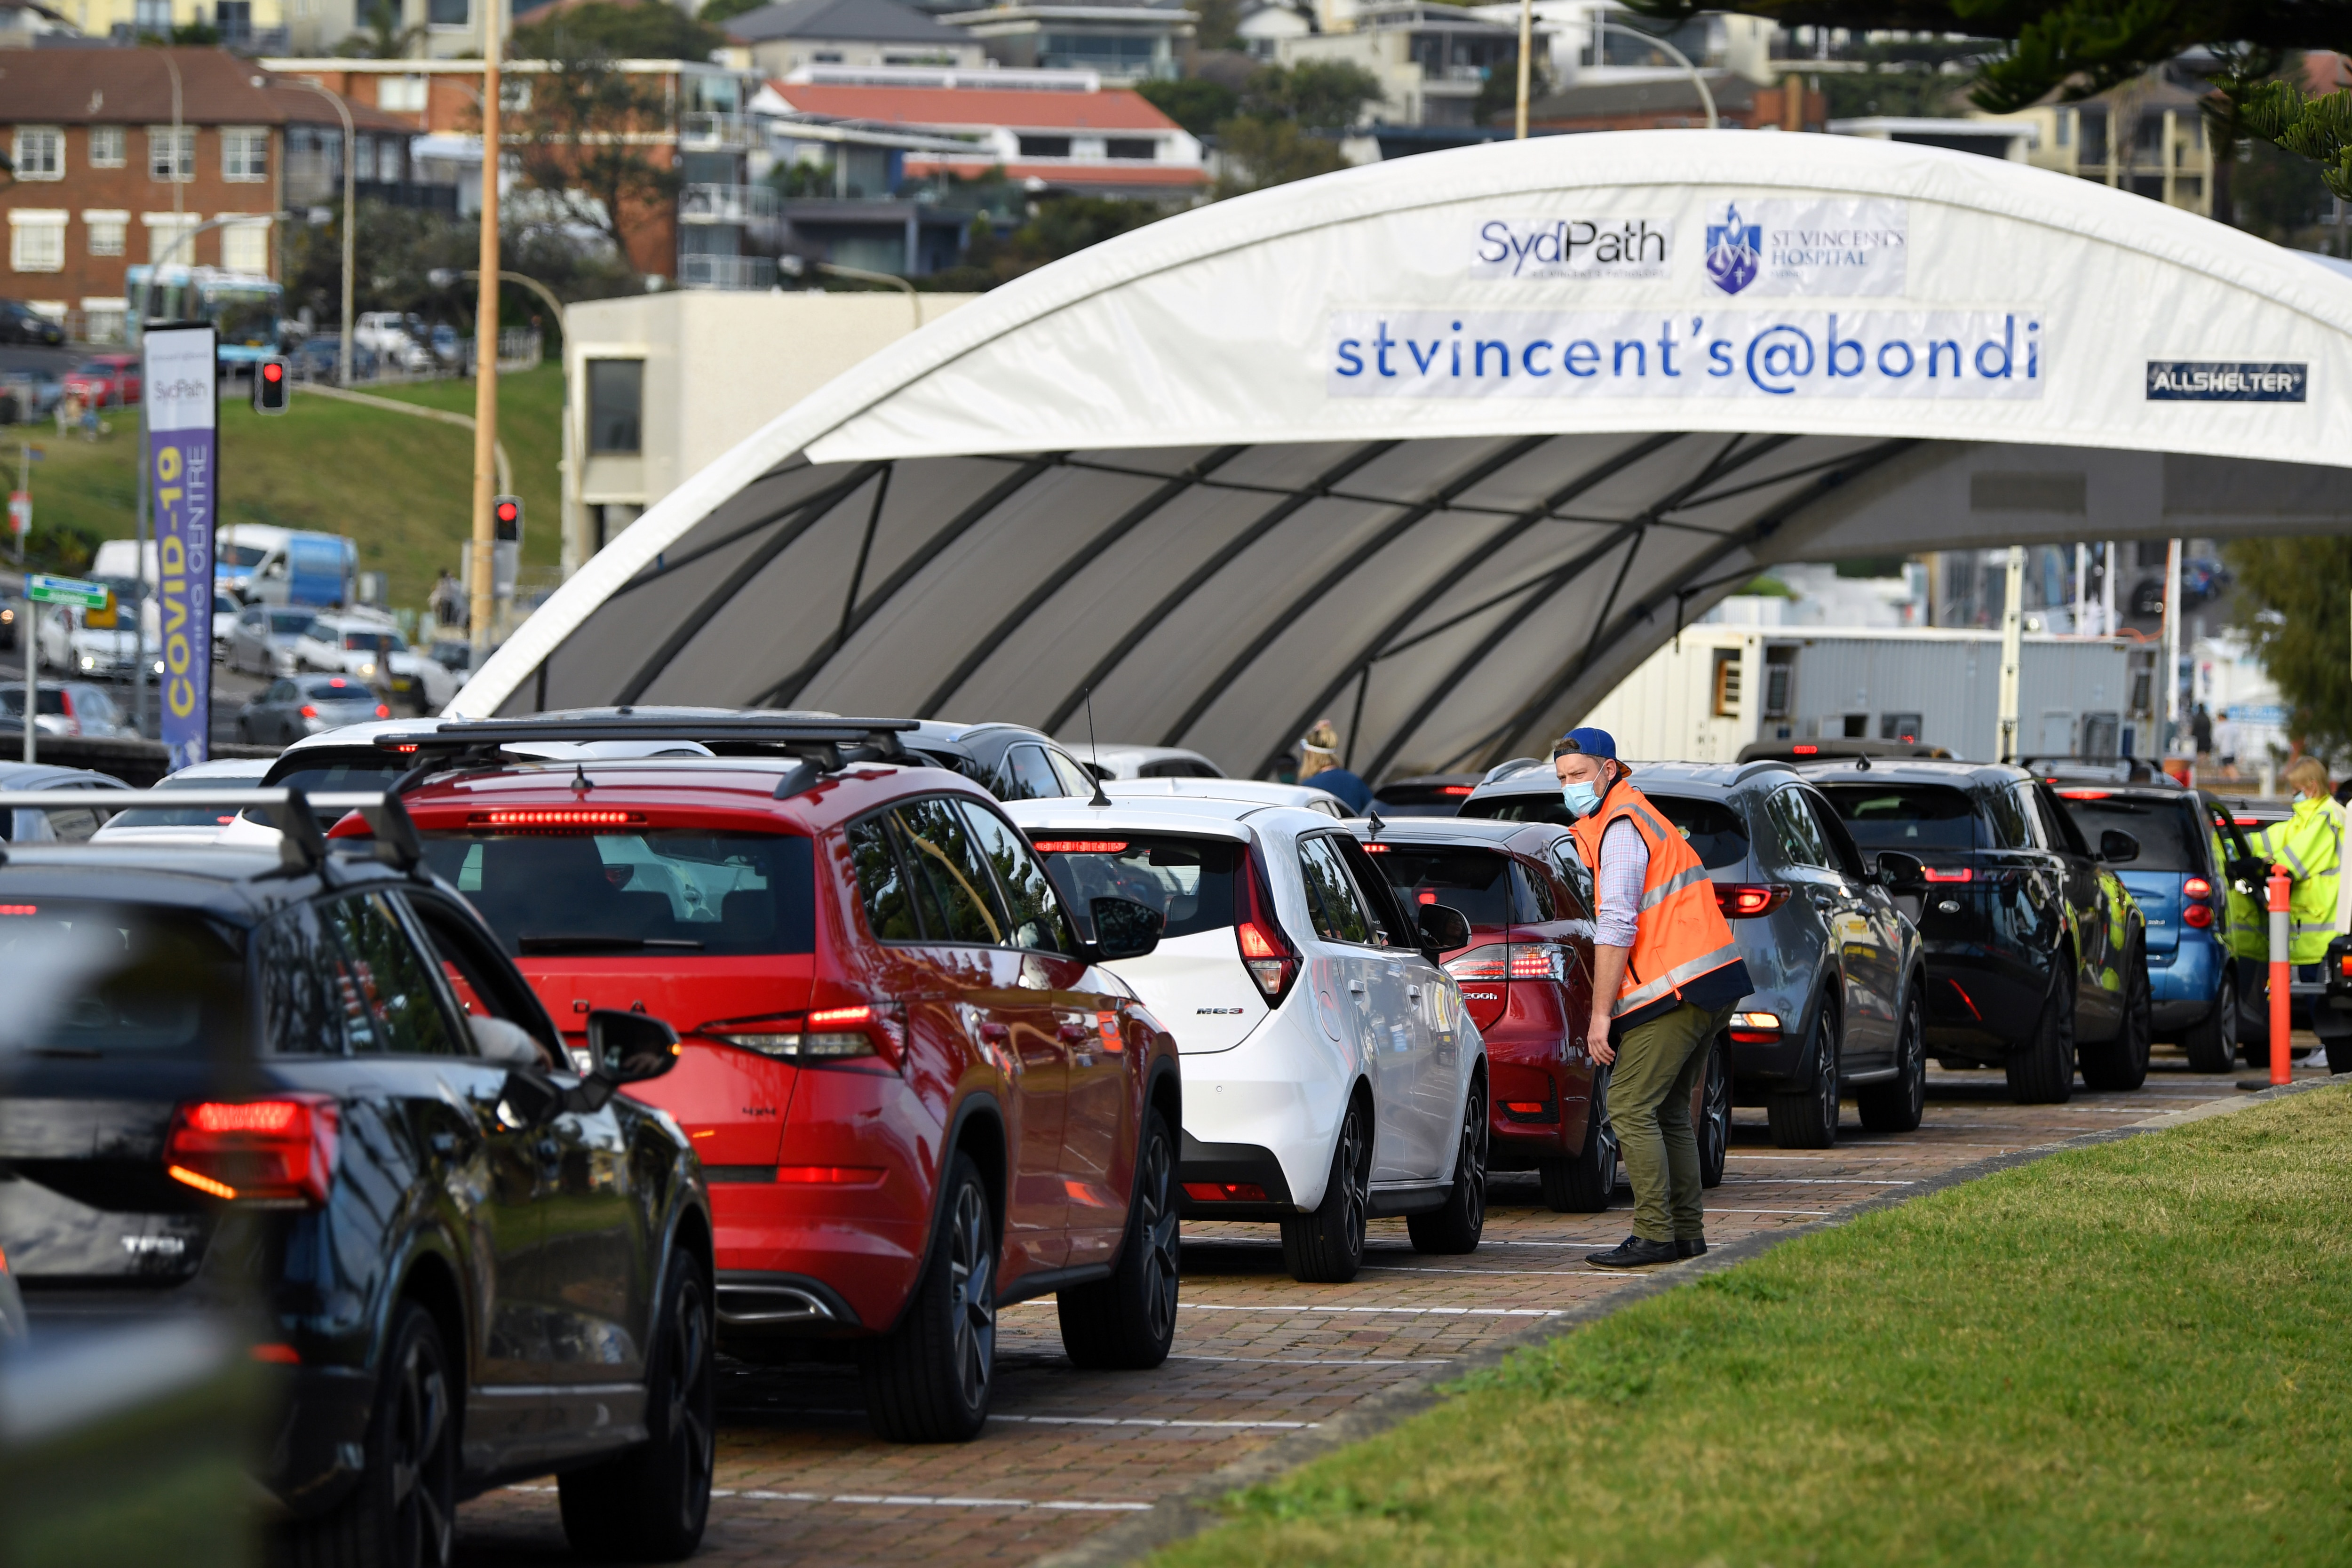 Cars line up for COVID-19 testing at Bondi in Sydney on Tuesday.